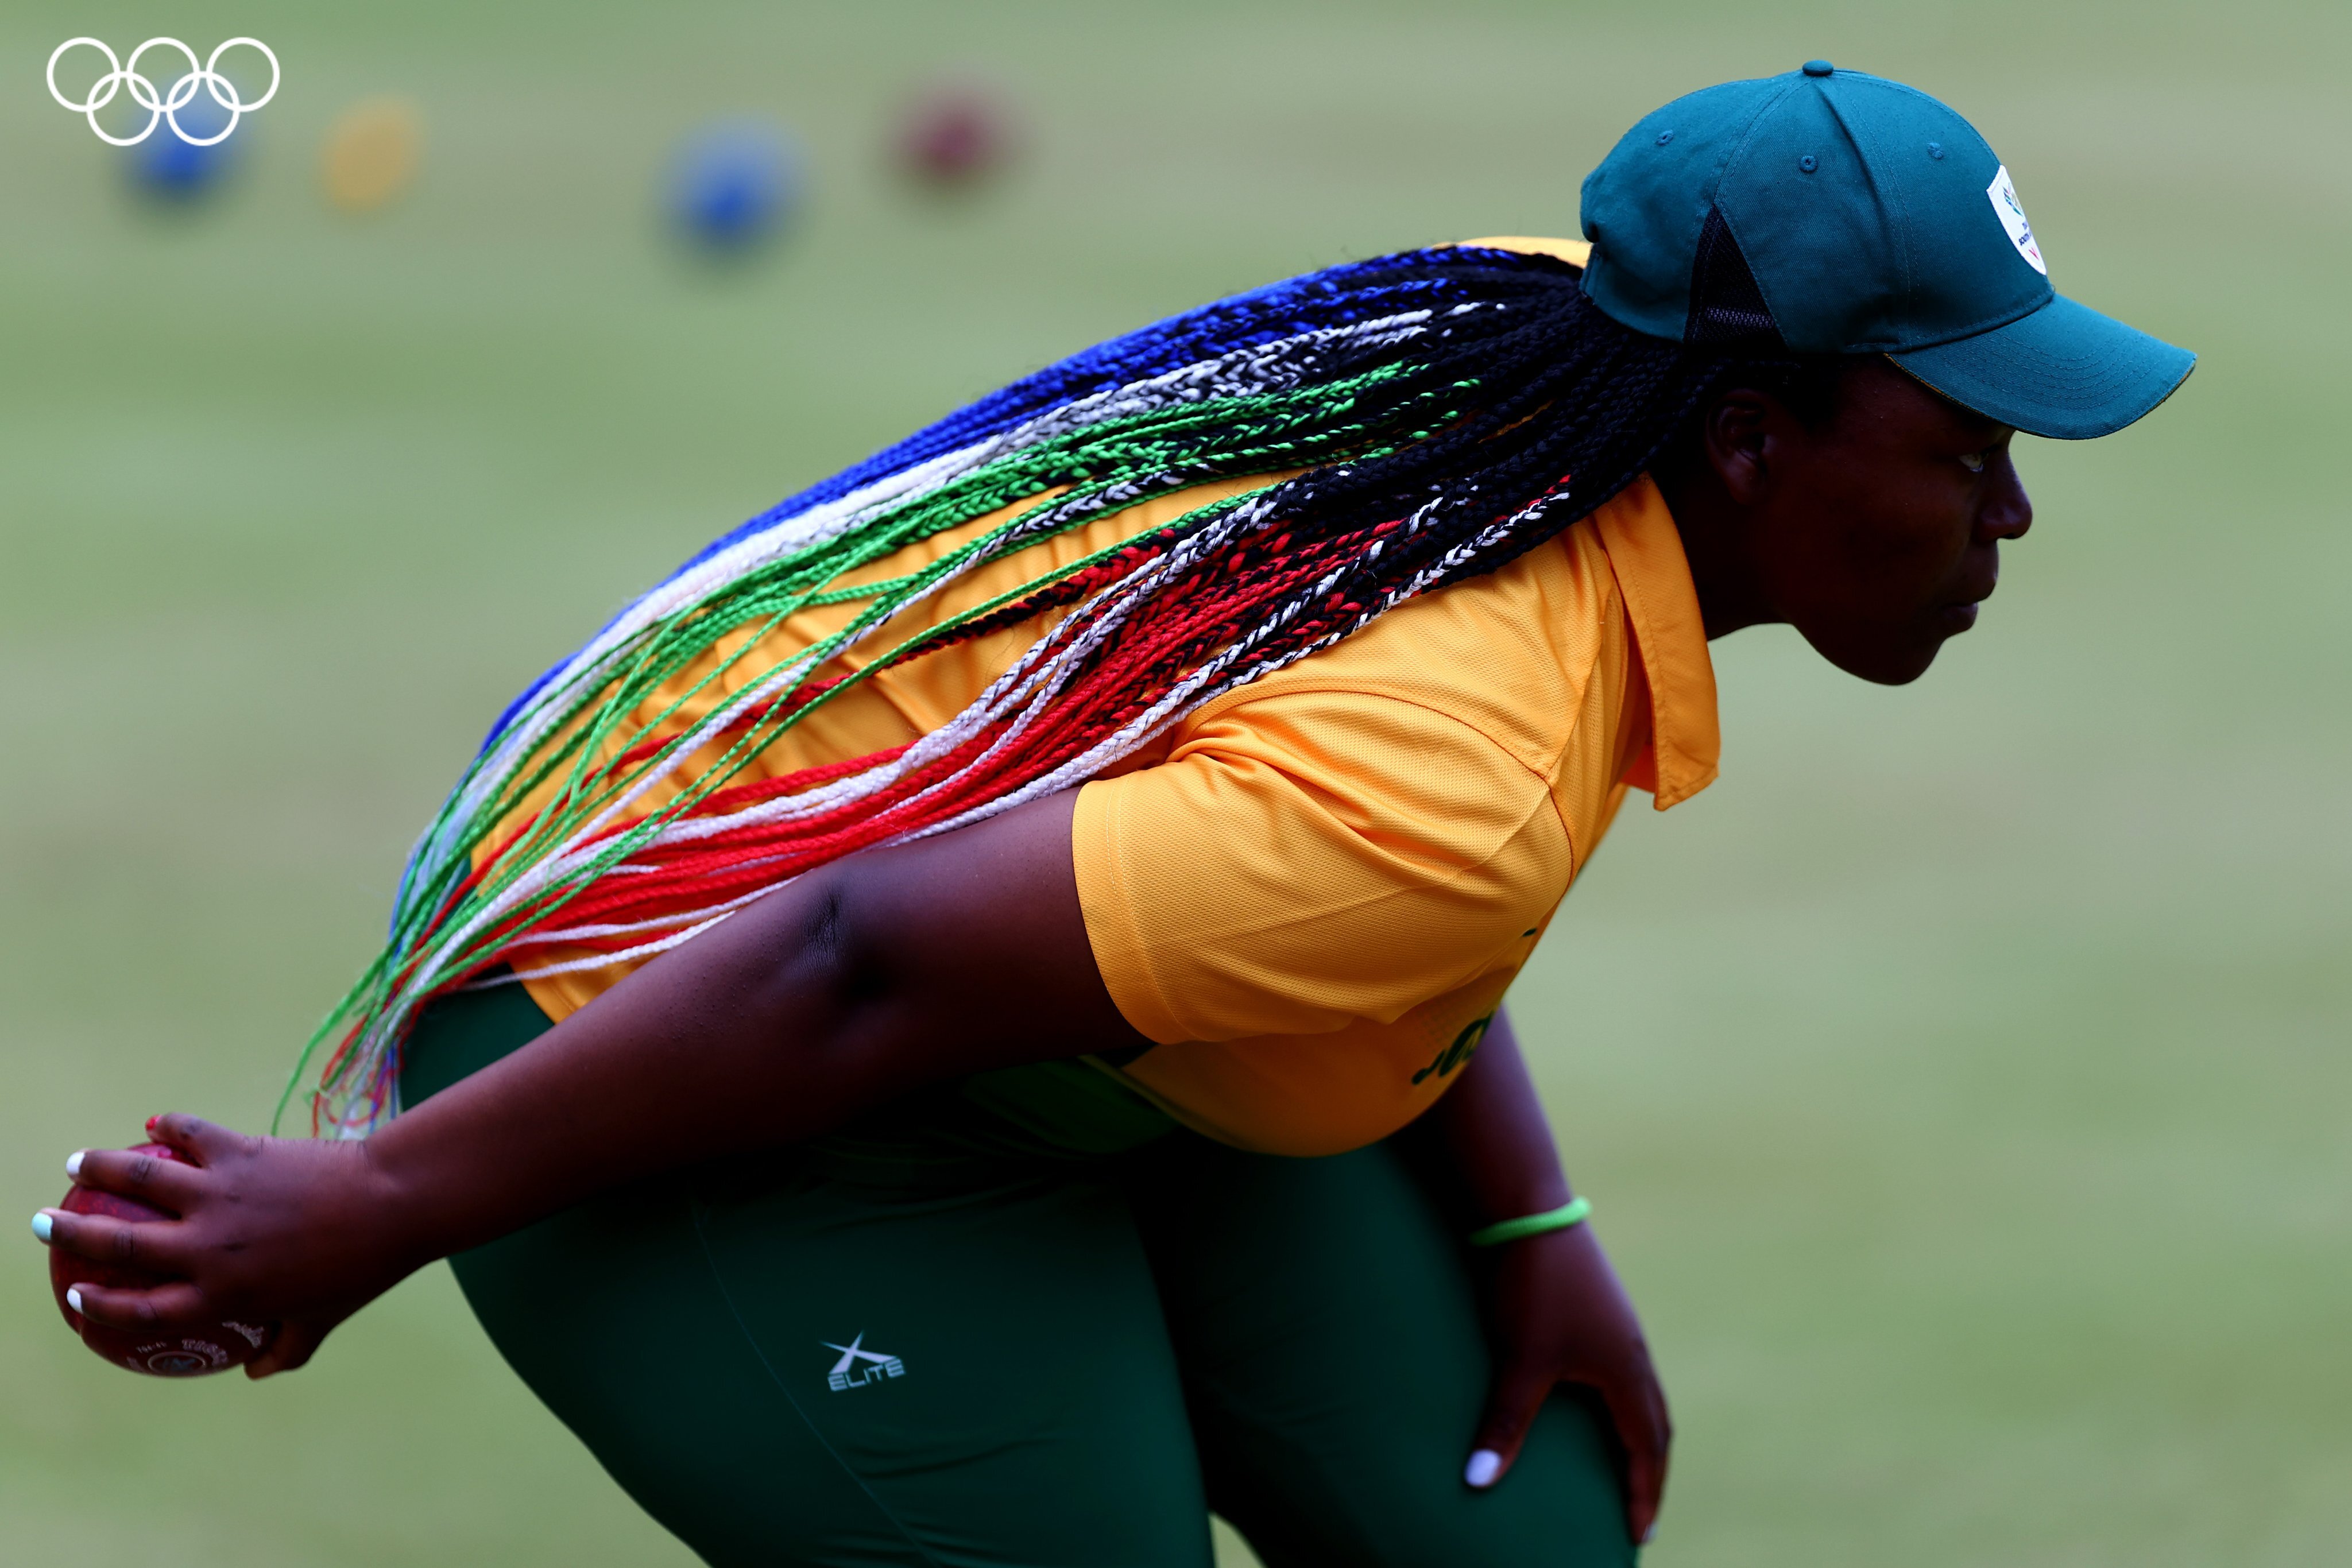 Thabelo Muvhango with hair game on the Lawn Bowls green at the Commonwealth Games for South Africa